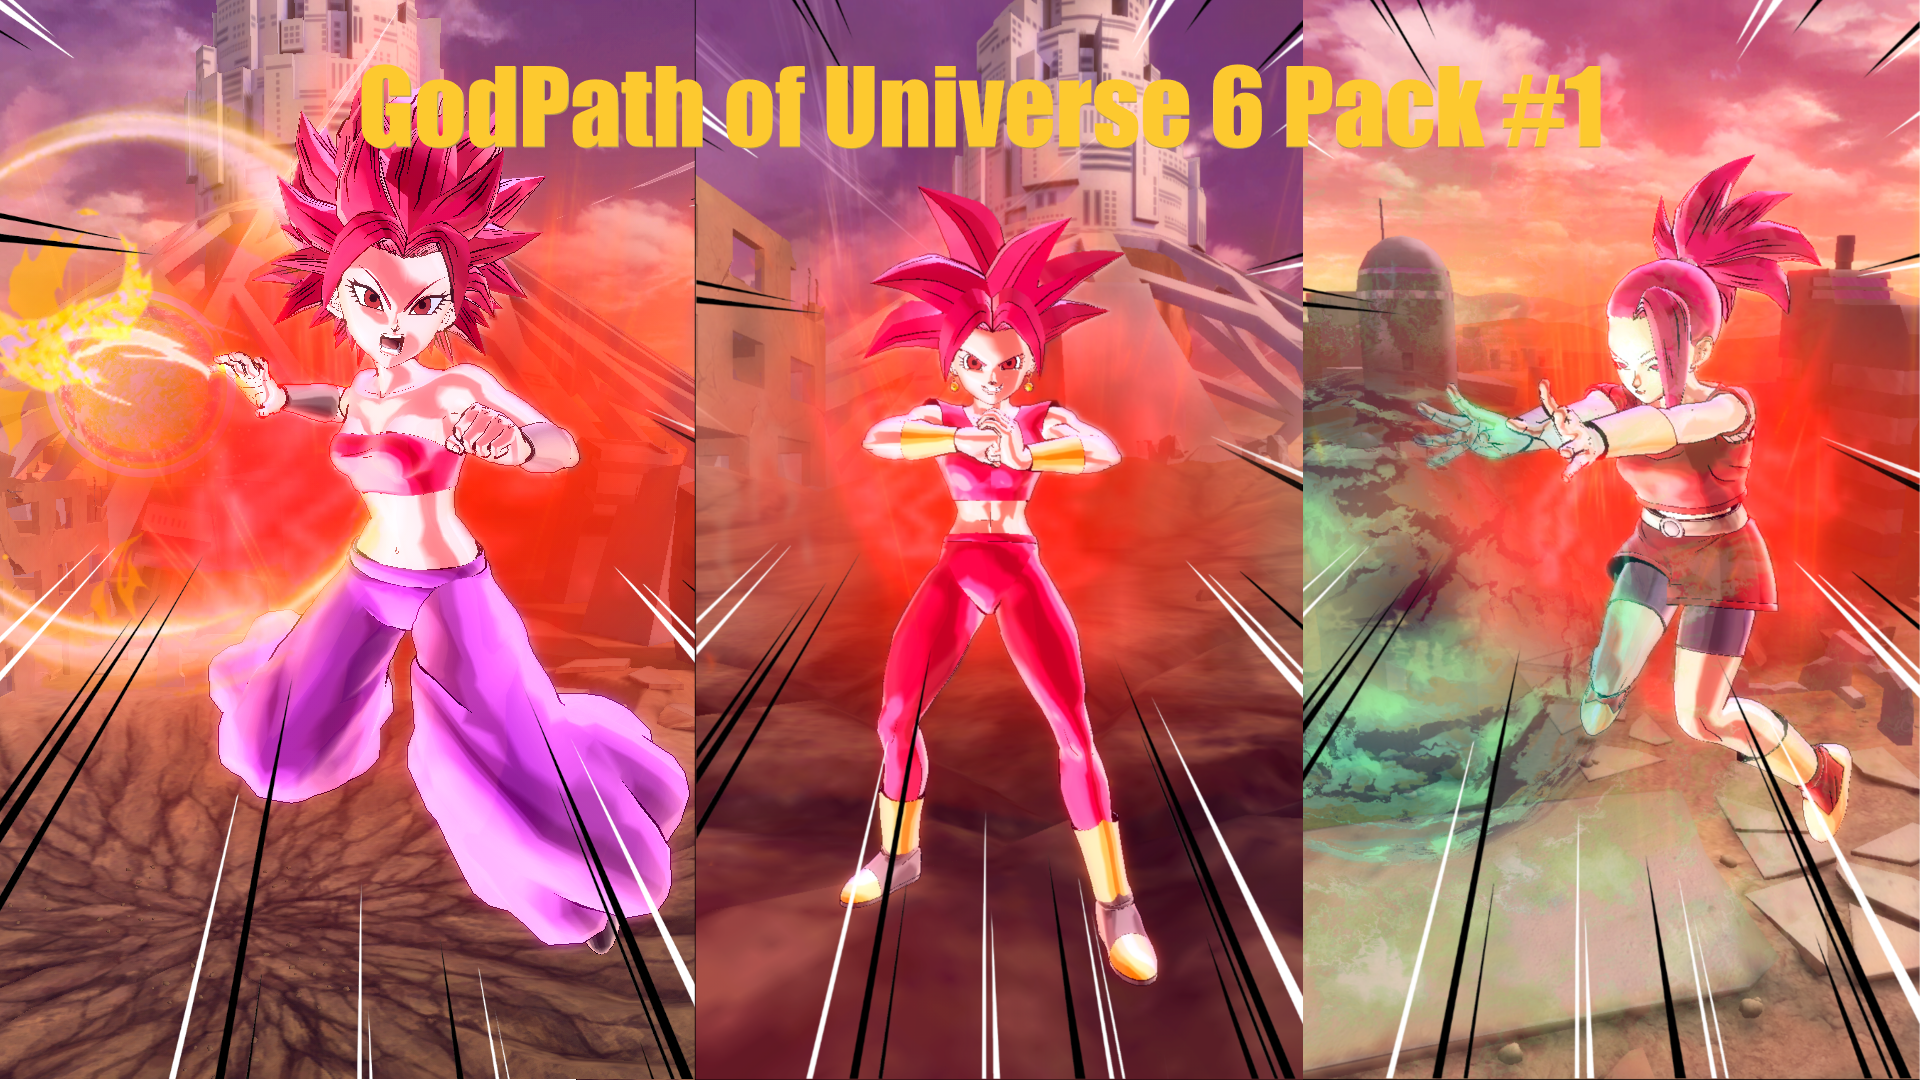 GodPath of Universe 6 Pack #1